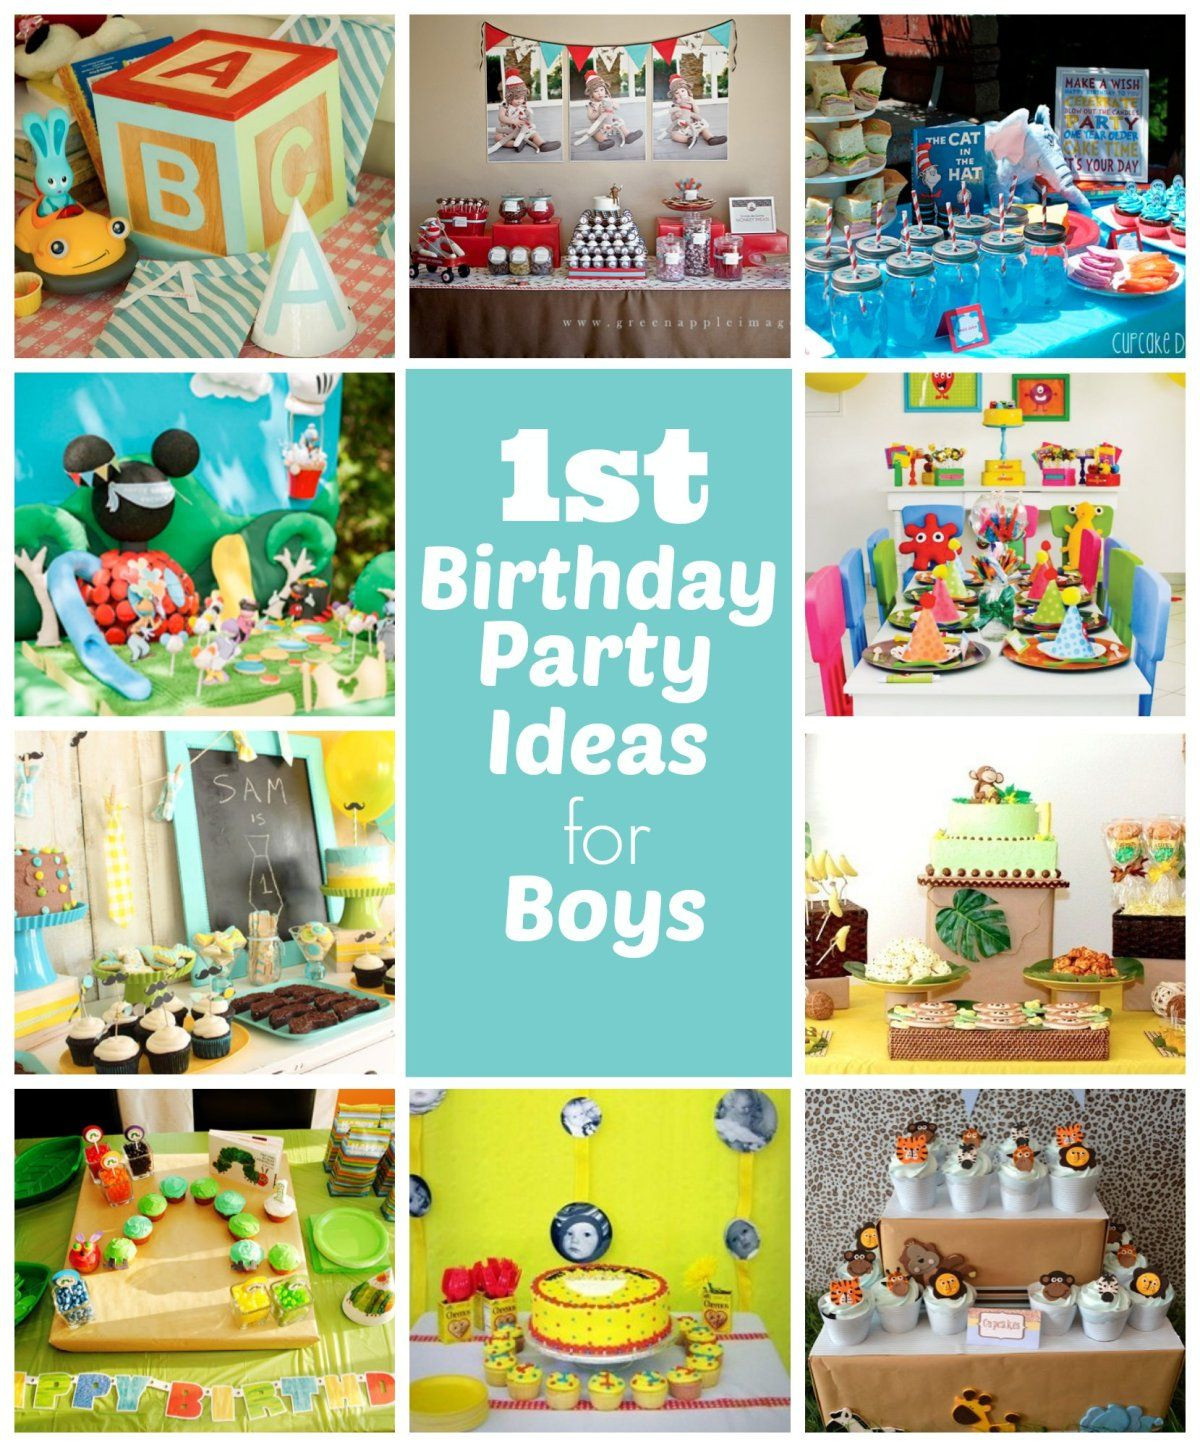 1st Birthday Party Supplies Boy
 1st Birthday Party Ideas for Boys Kids